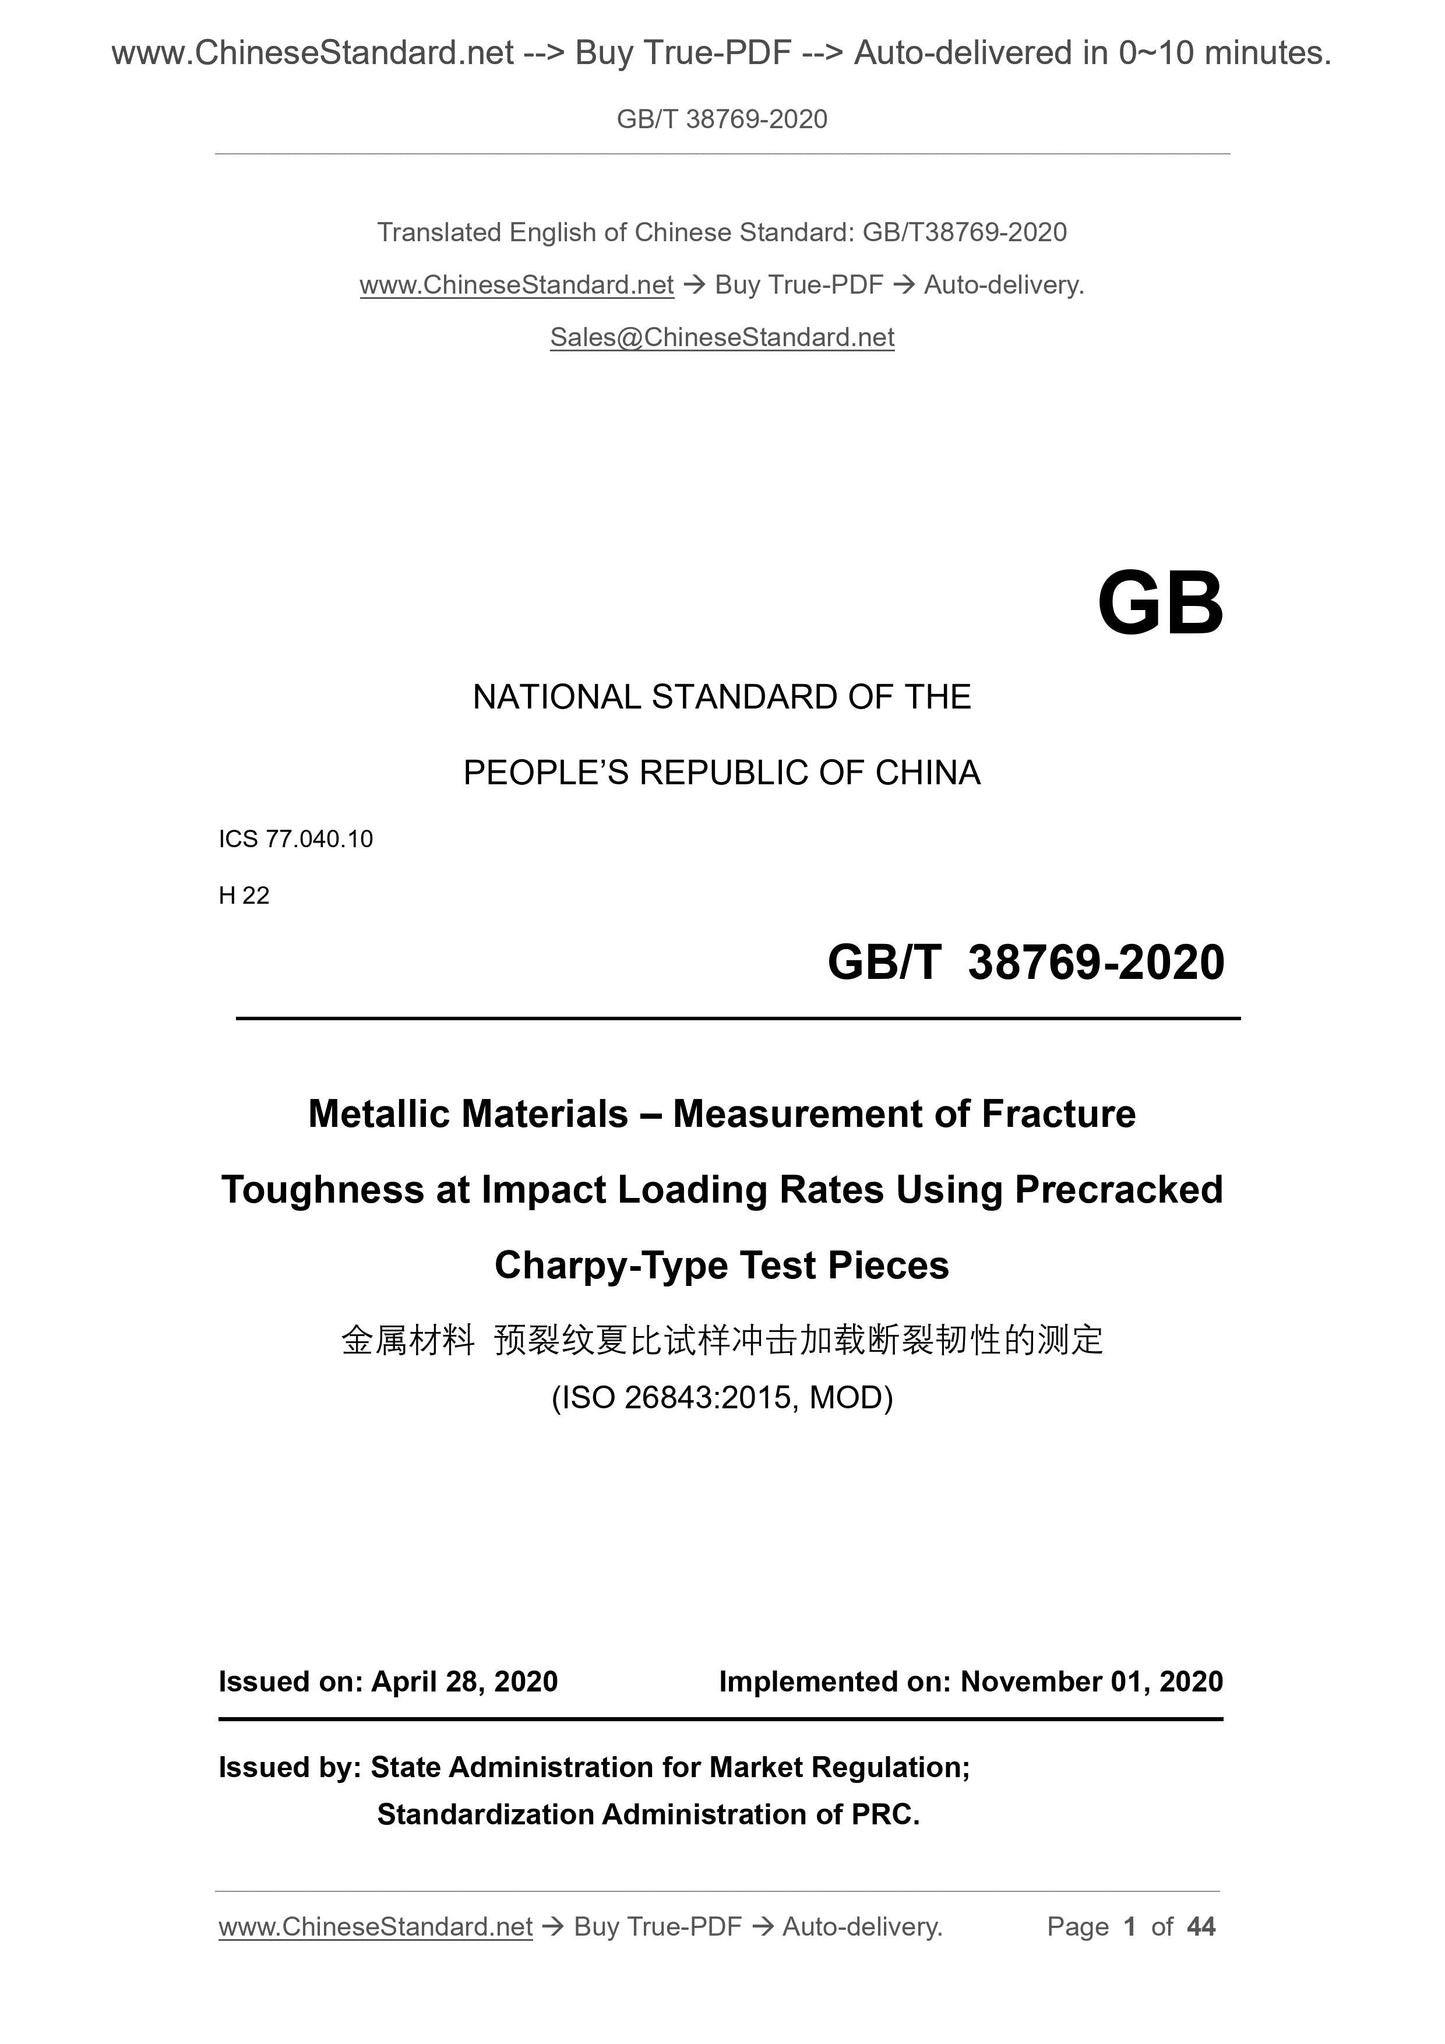 GB/T 38769-2020 Page 1